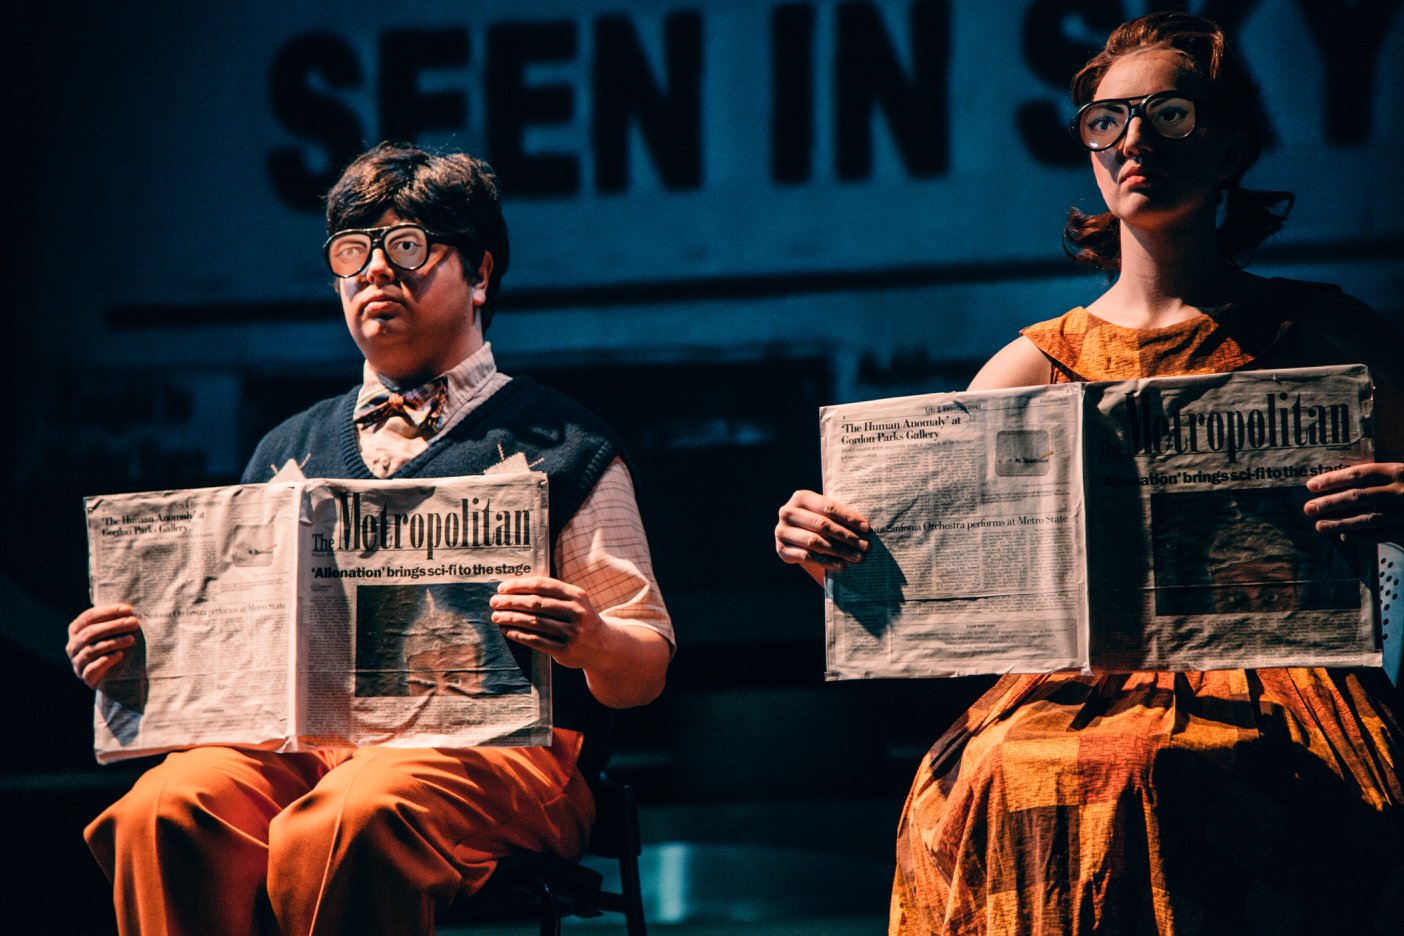 Maurice Manton, left, and Anna Pladson read copies of The Metropolitan in a scene from “Alienation,” a winter 2018 production of Metro State’s theater department. (Photo by Matt Benyo)